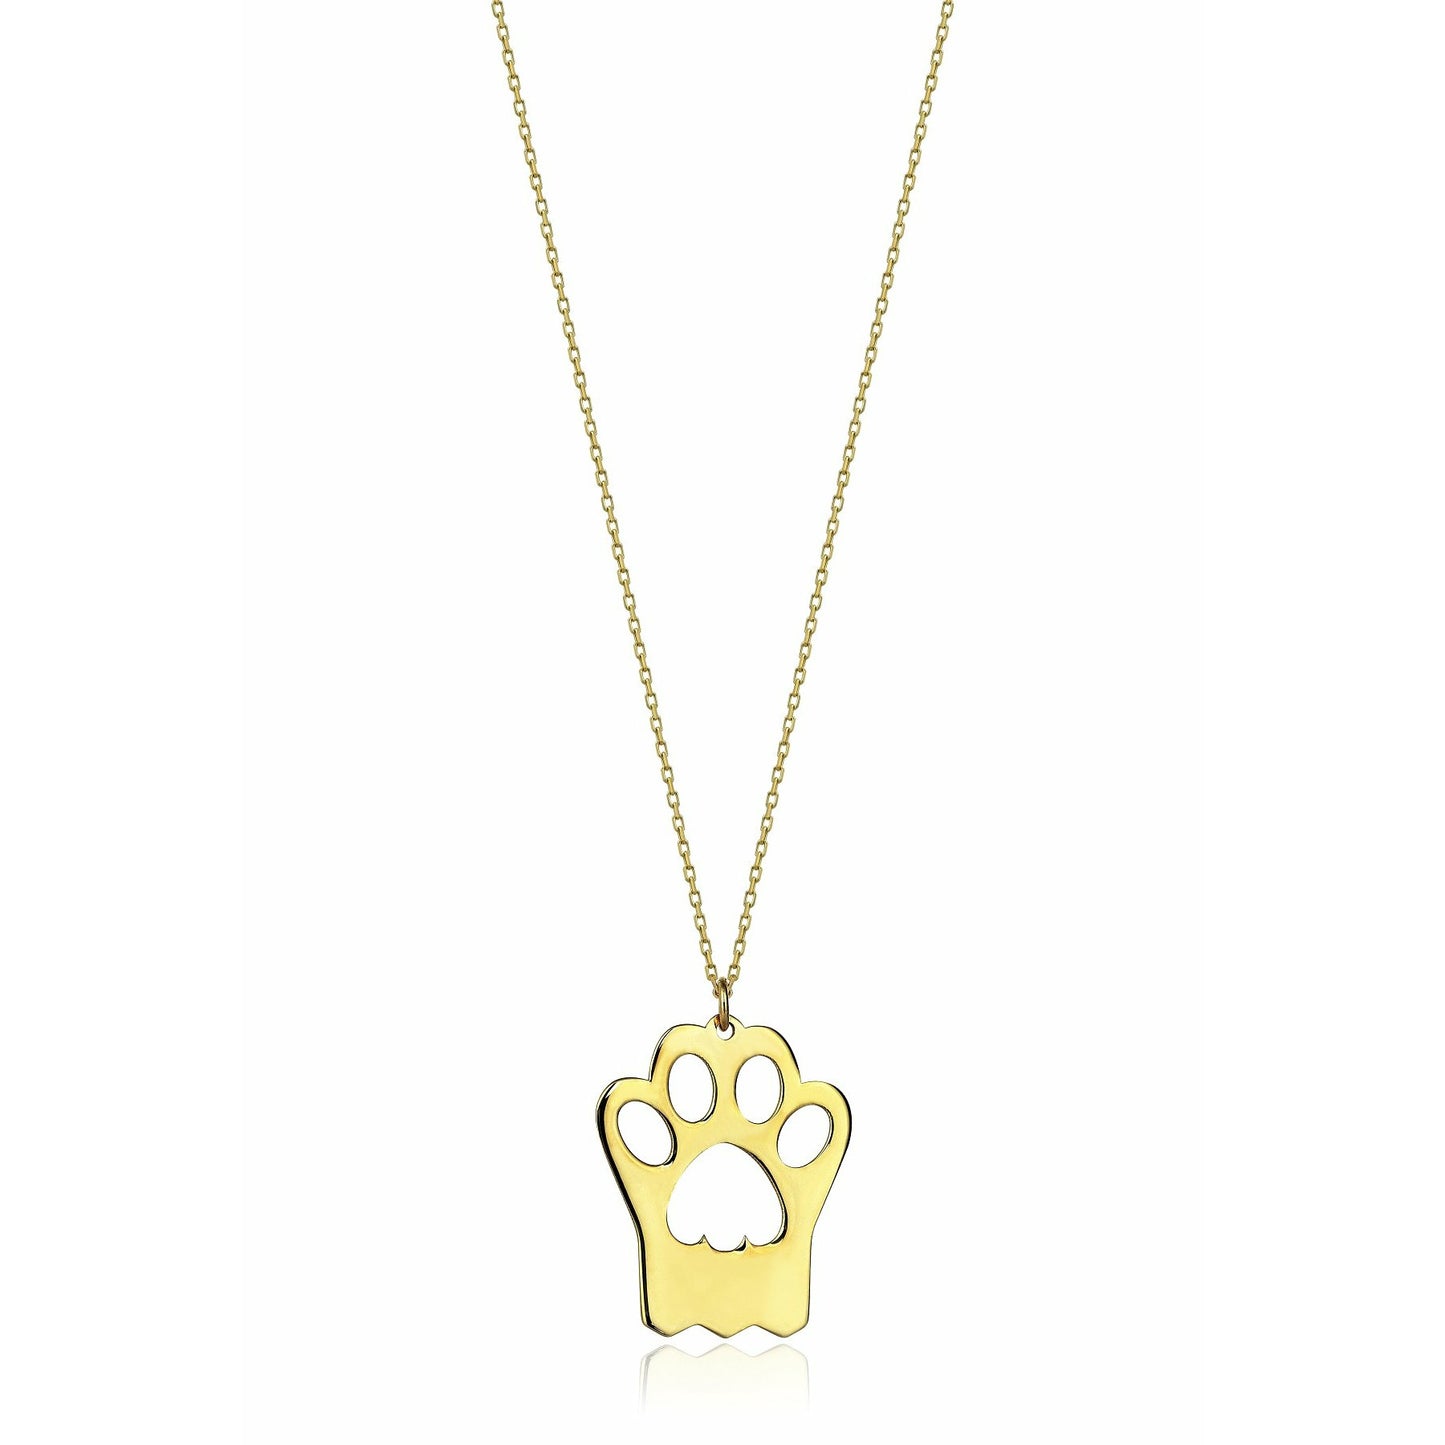 Special Design Gift 14k Gold Paw Necklace 